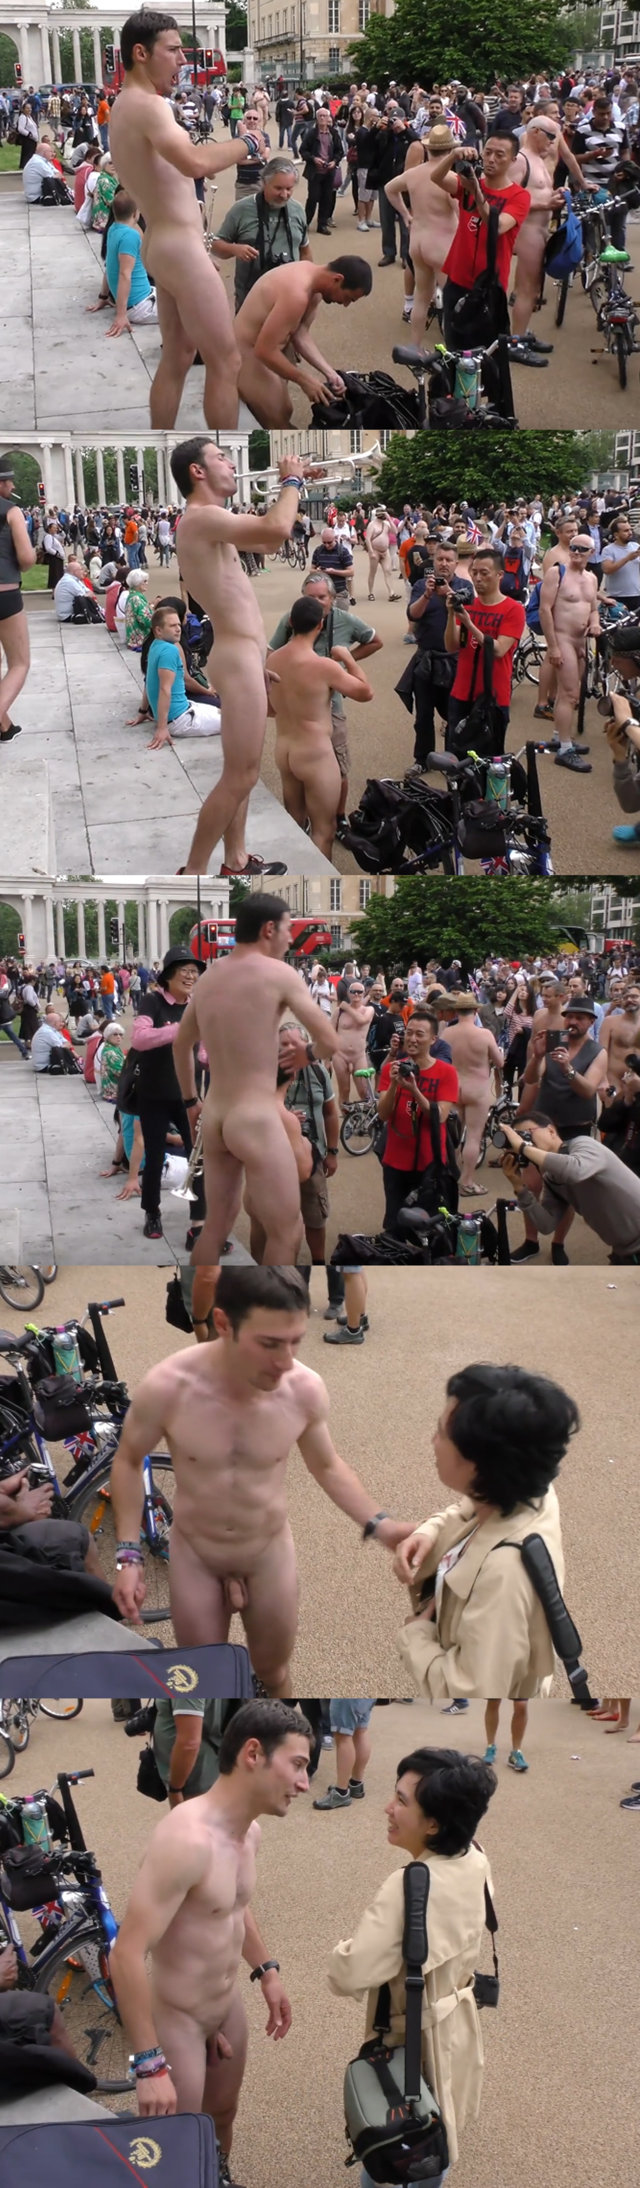 uncut guy playing trumpet naked during London WNBR